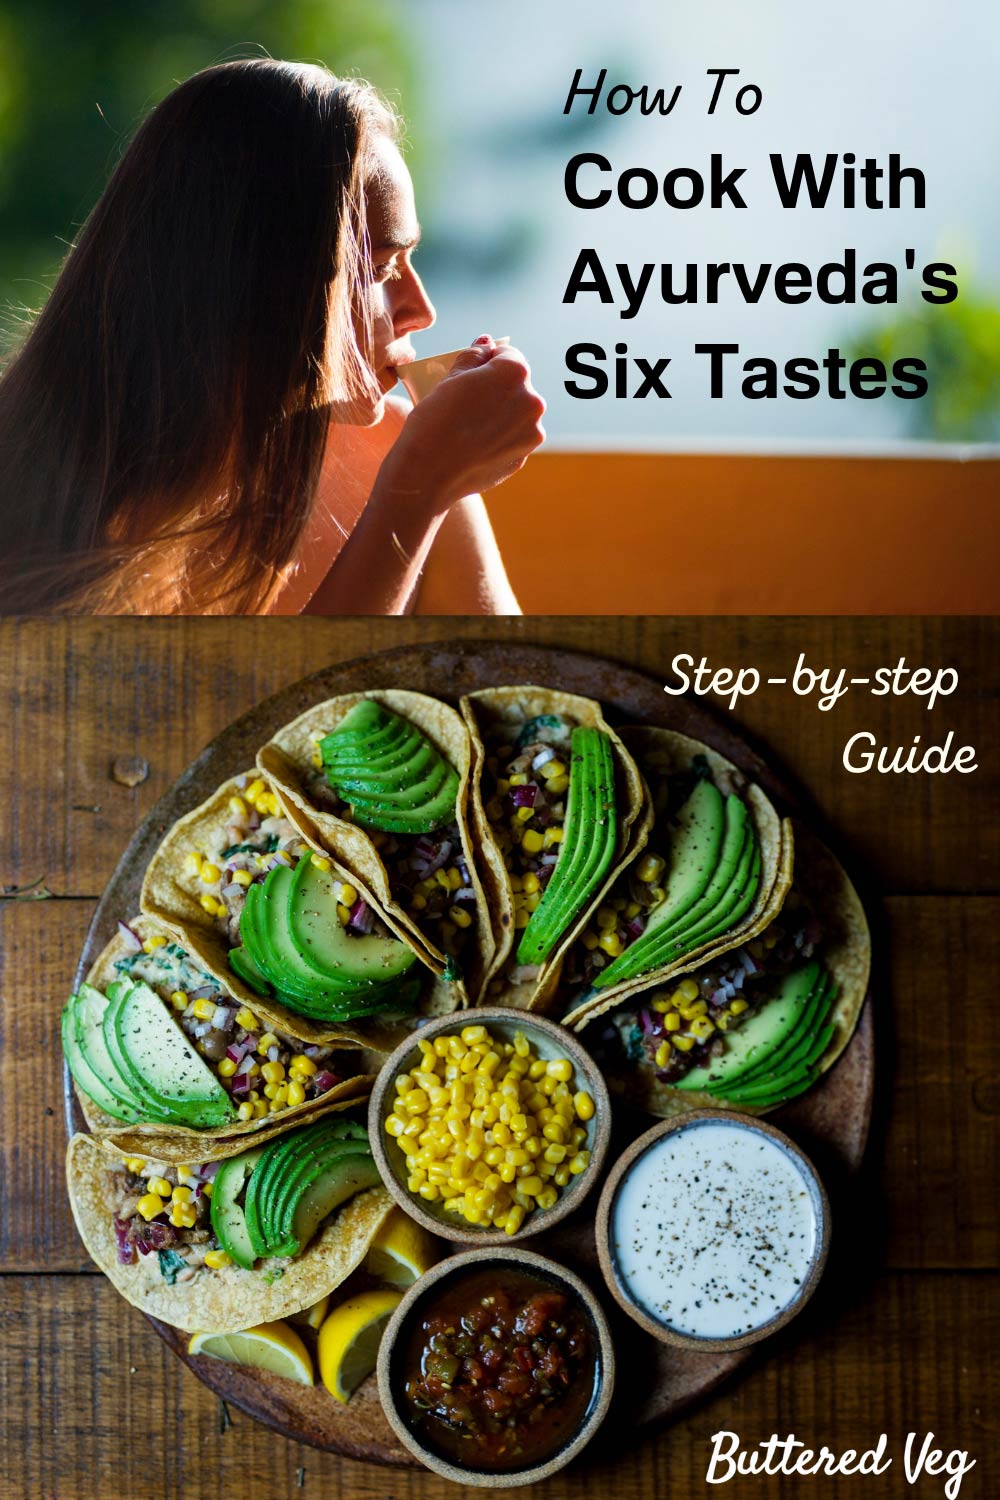 Ayurvedic Cooking with the Six Tastes (Step-by-step Guide)